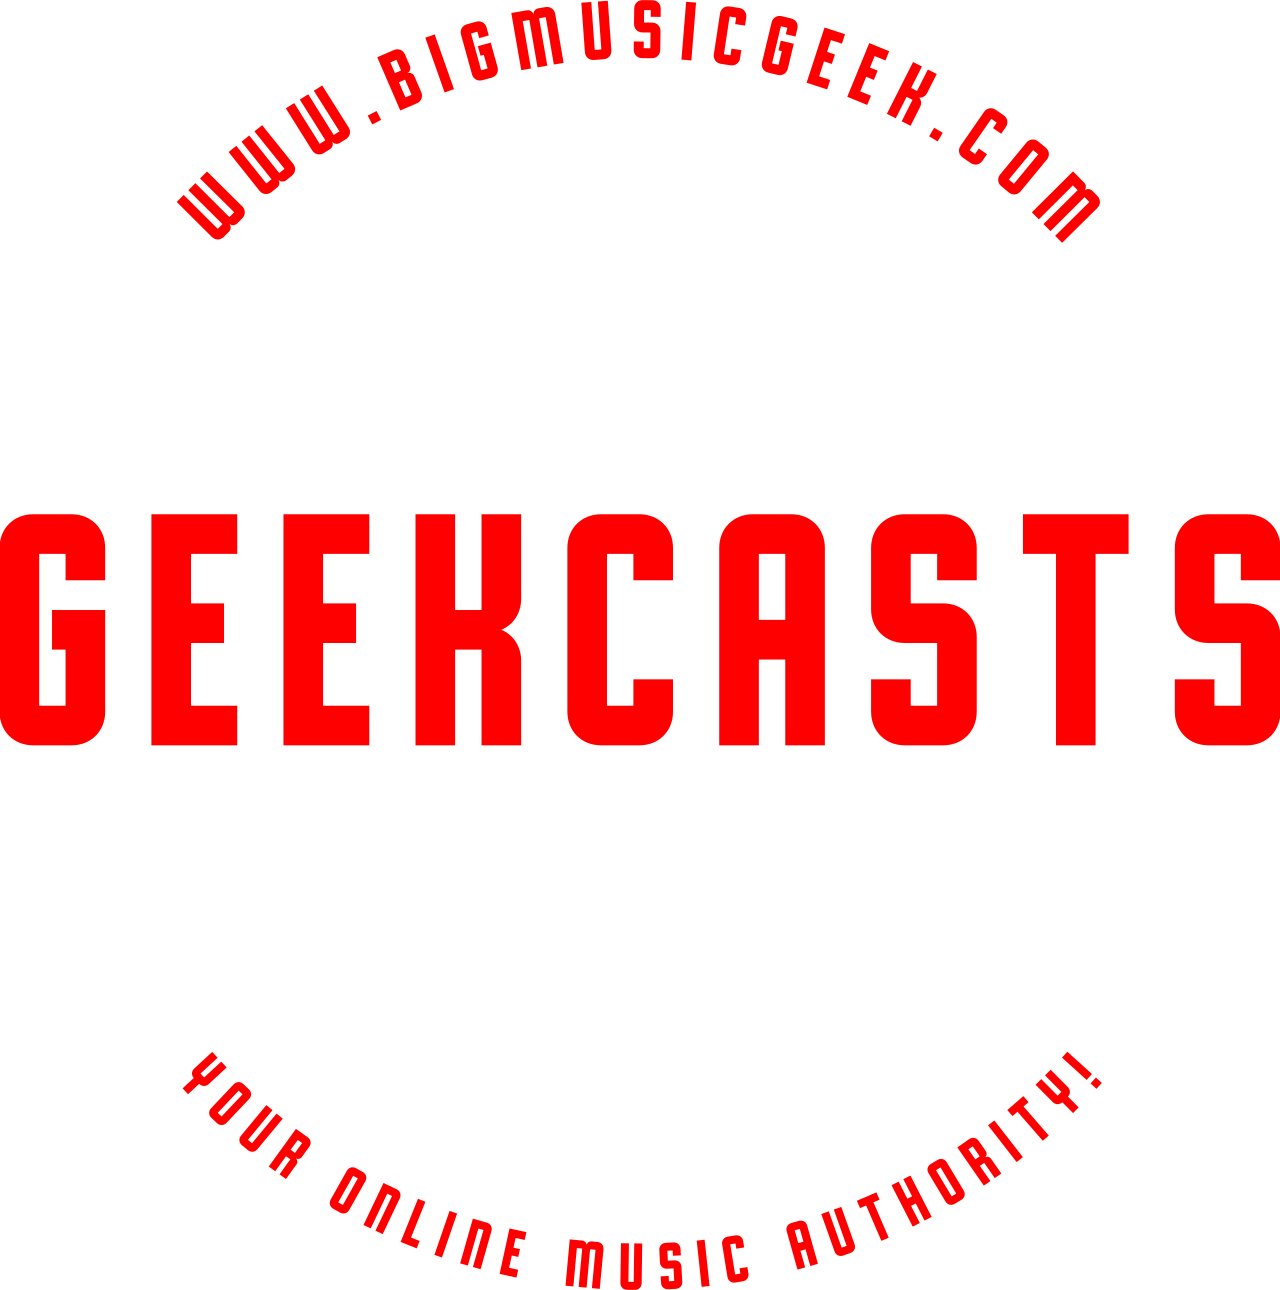 GeekCasts's web page